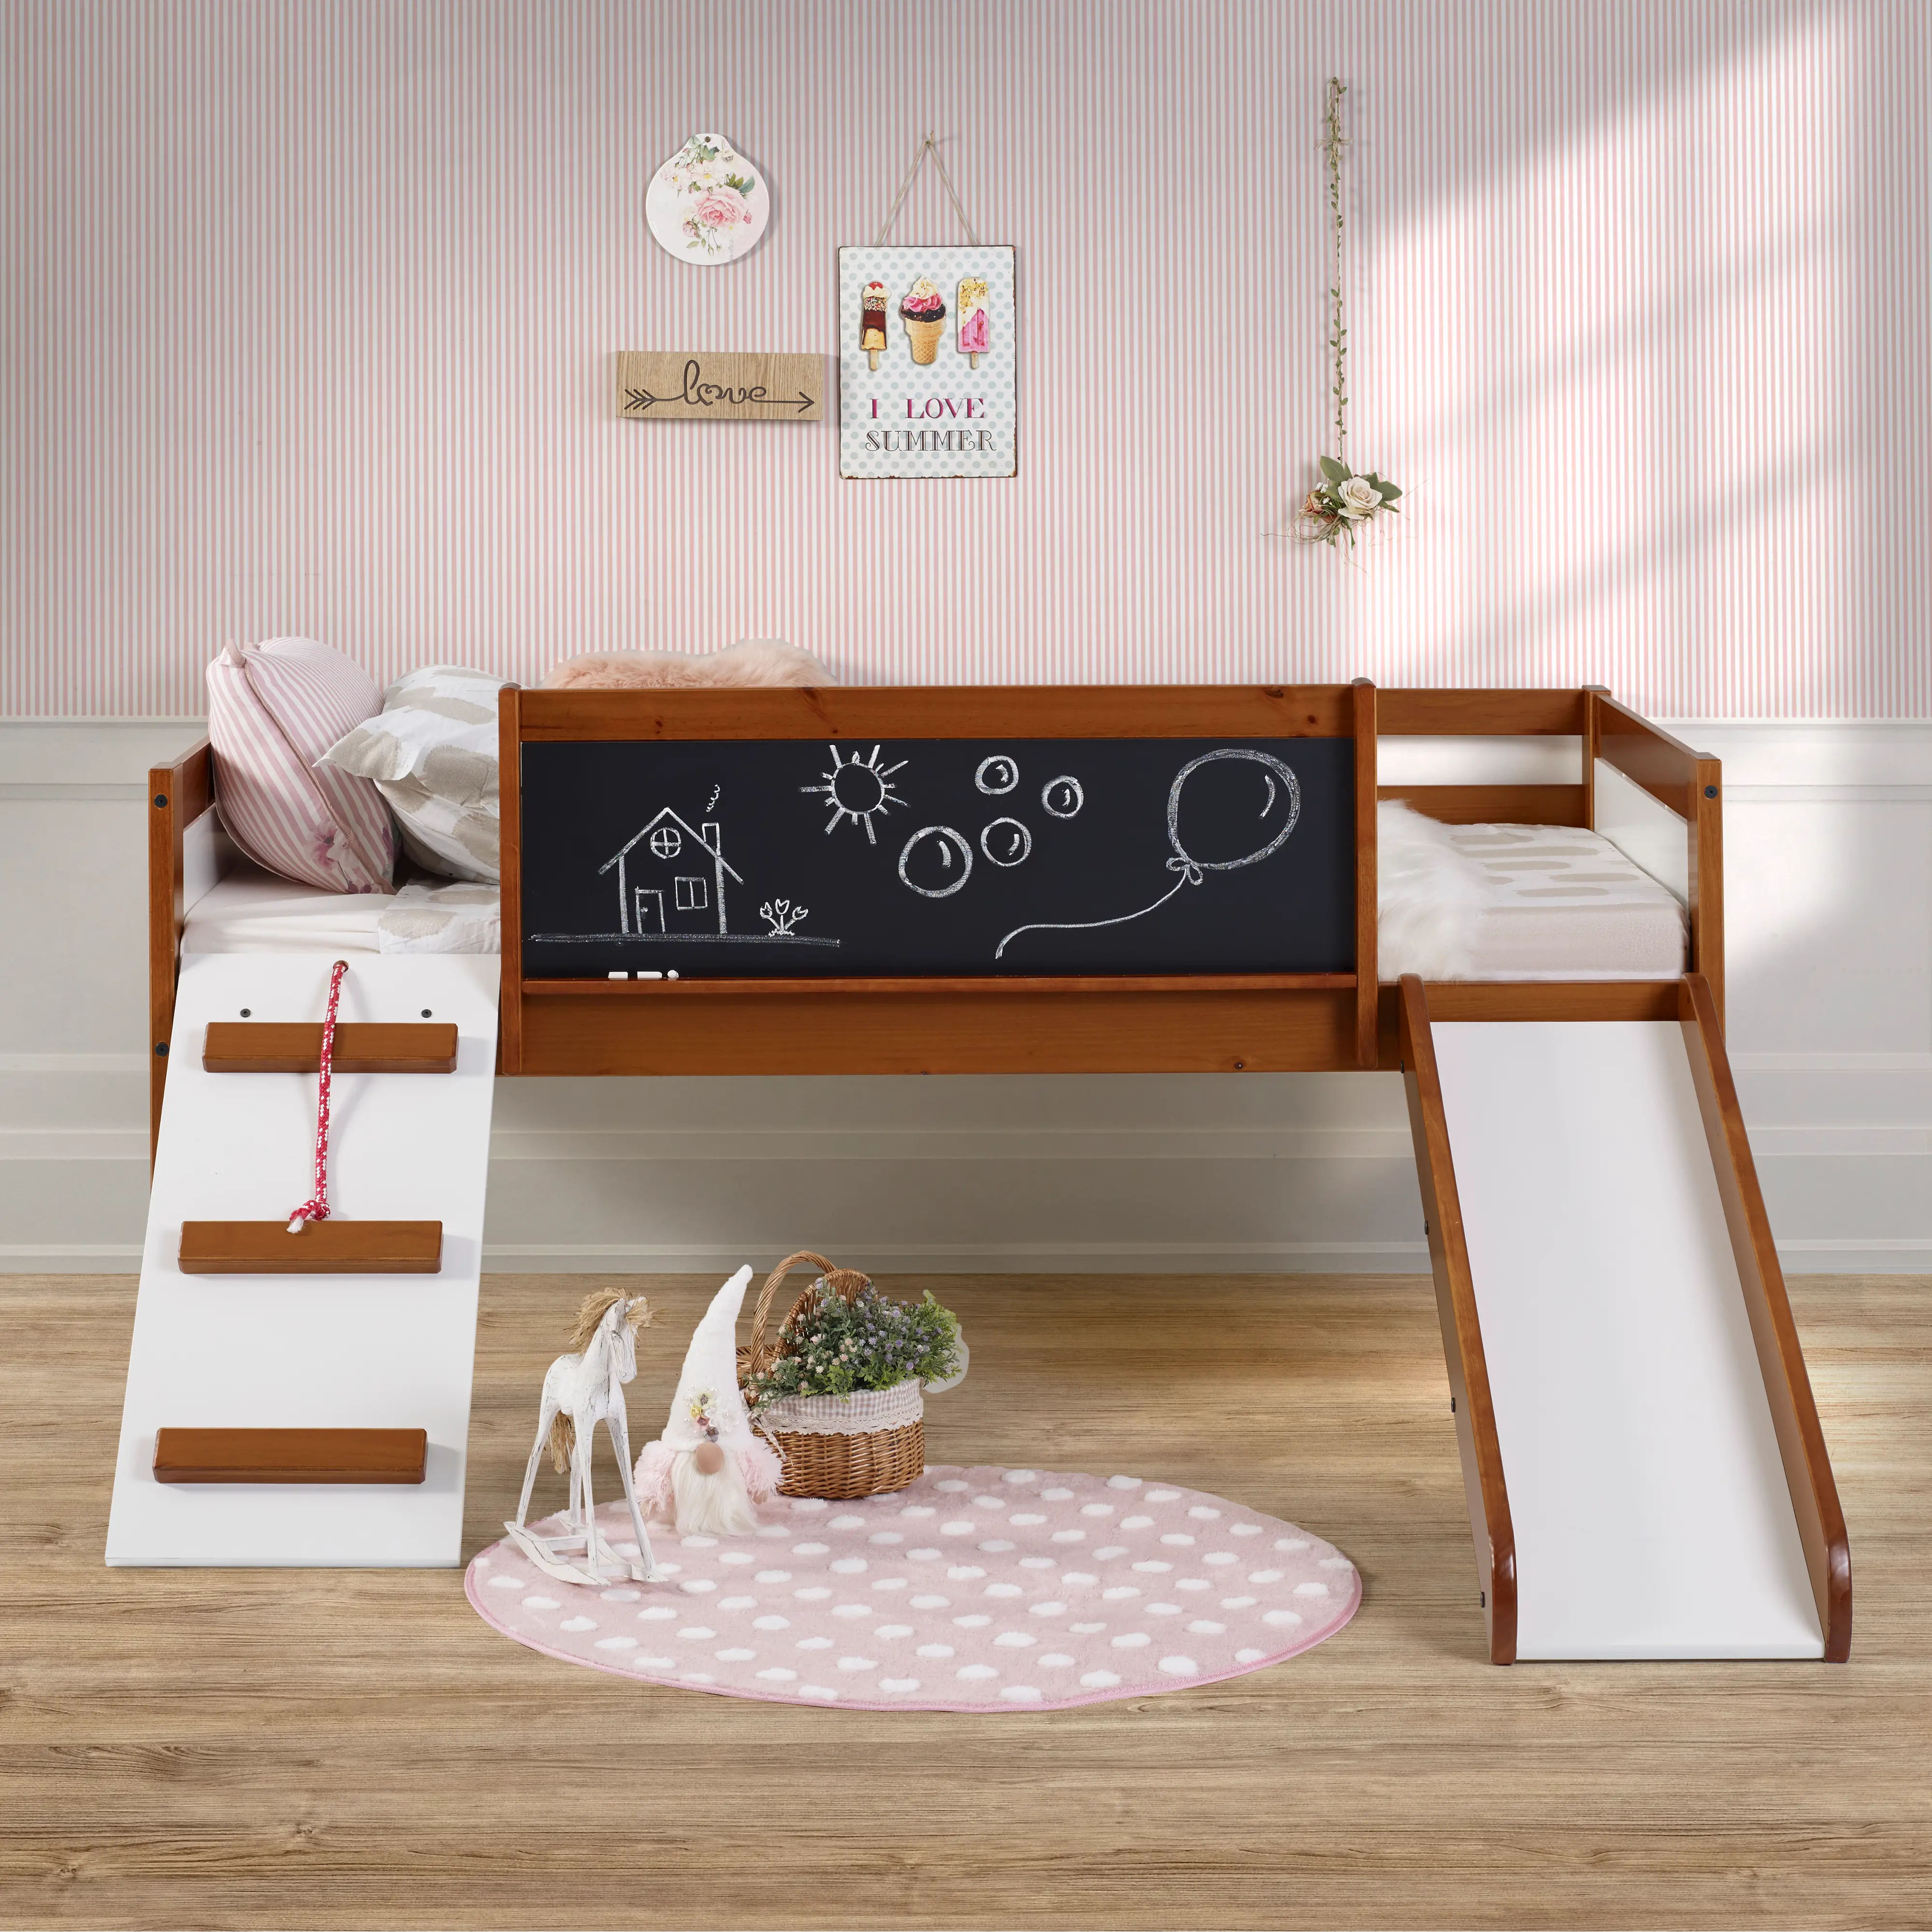 Contemporary Brown and White Twin Low Loft Bed - Junior